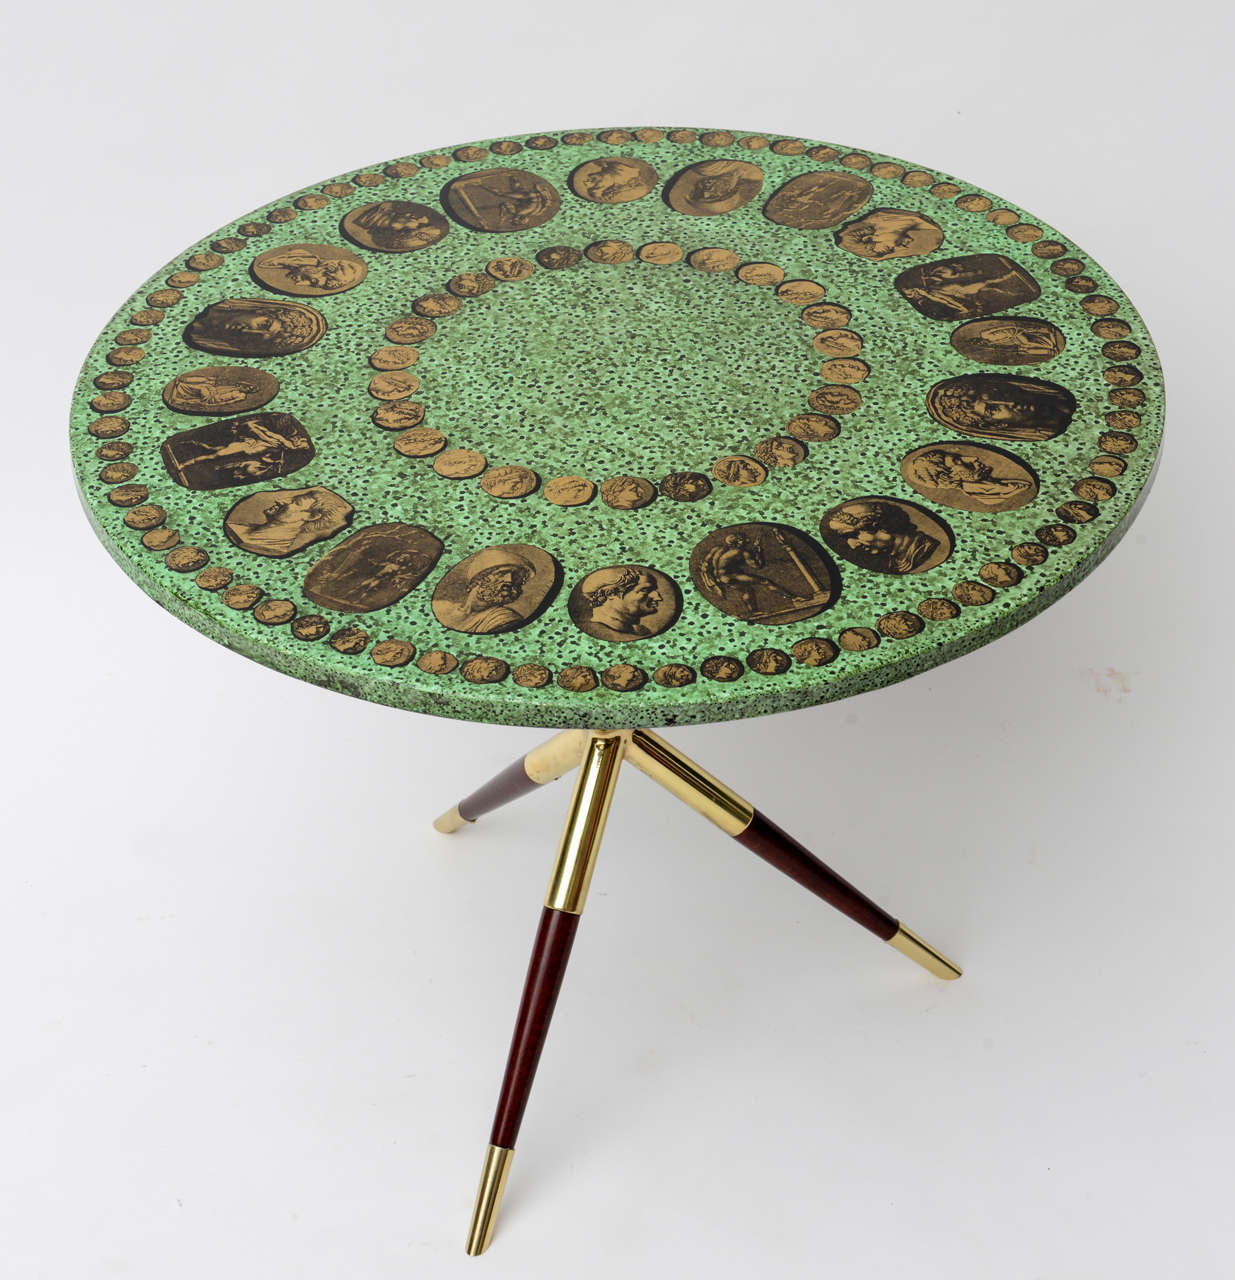 A stellar example of a Fornasetti Classic.
Brass and wood legs 